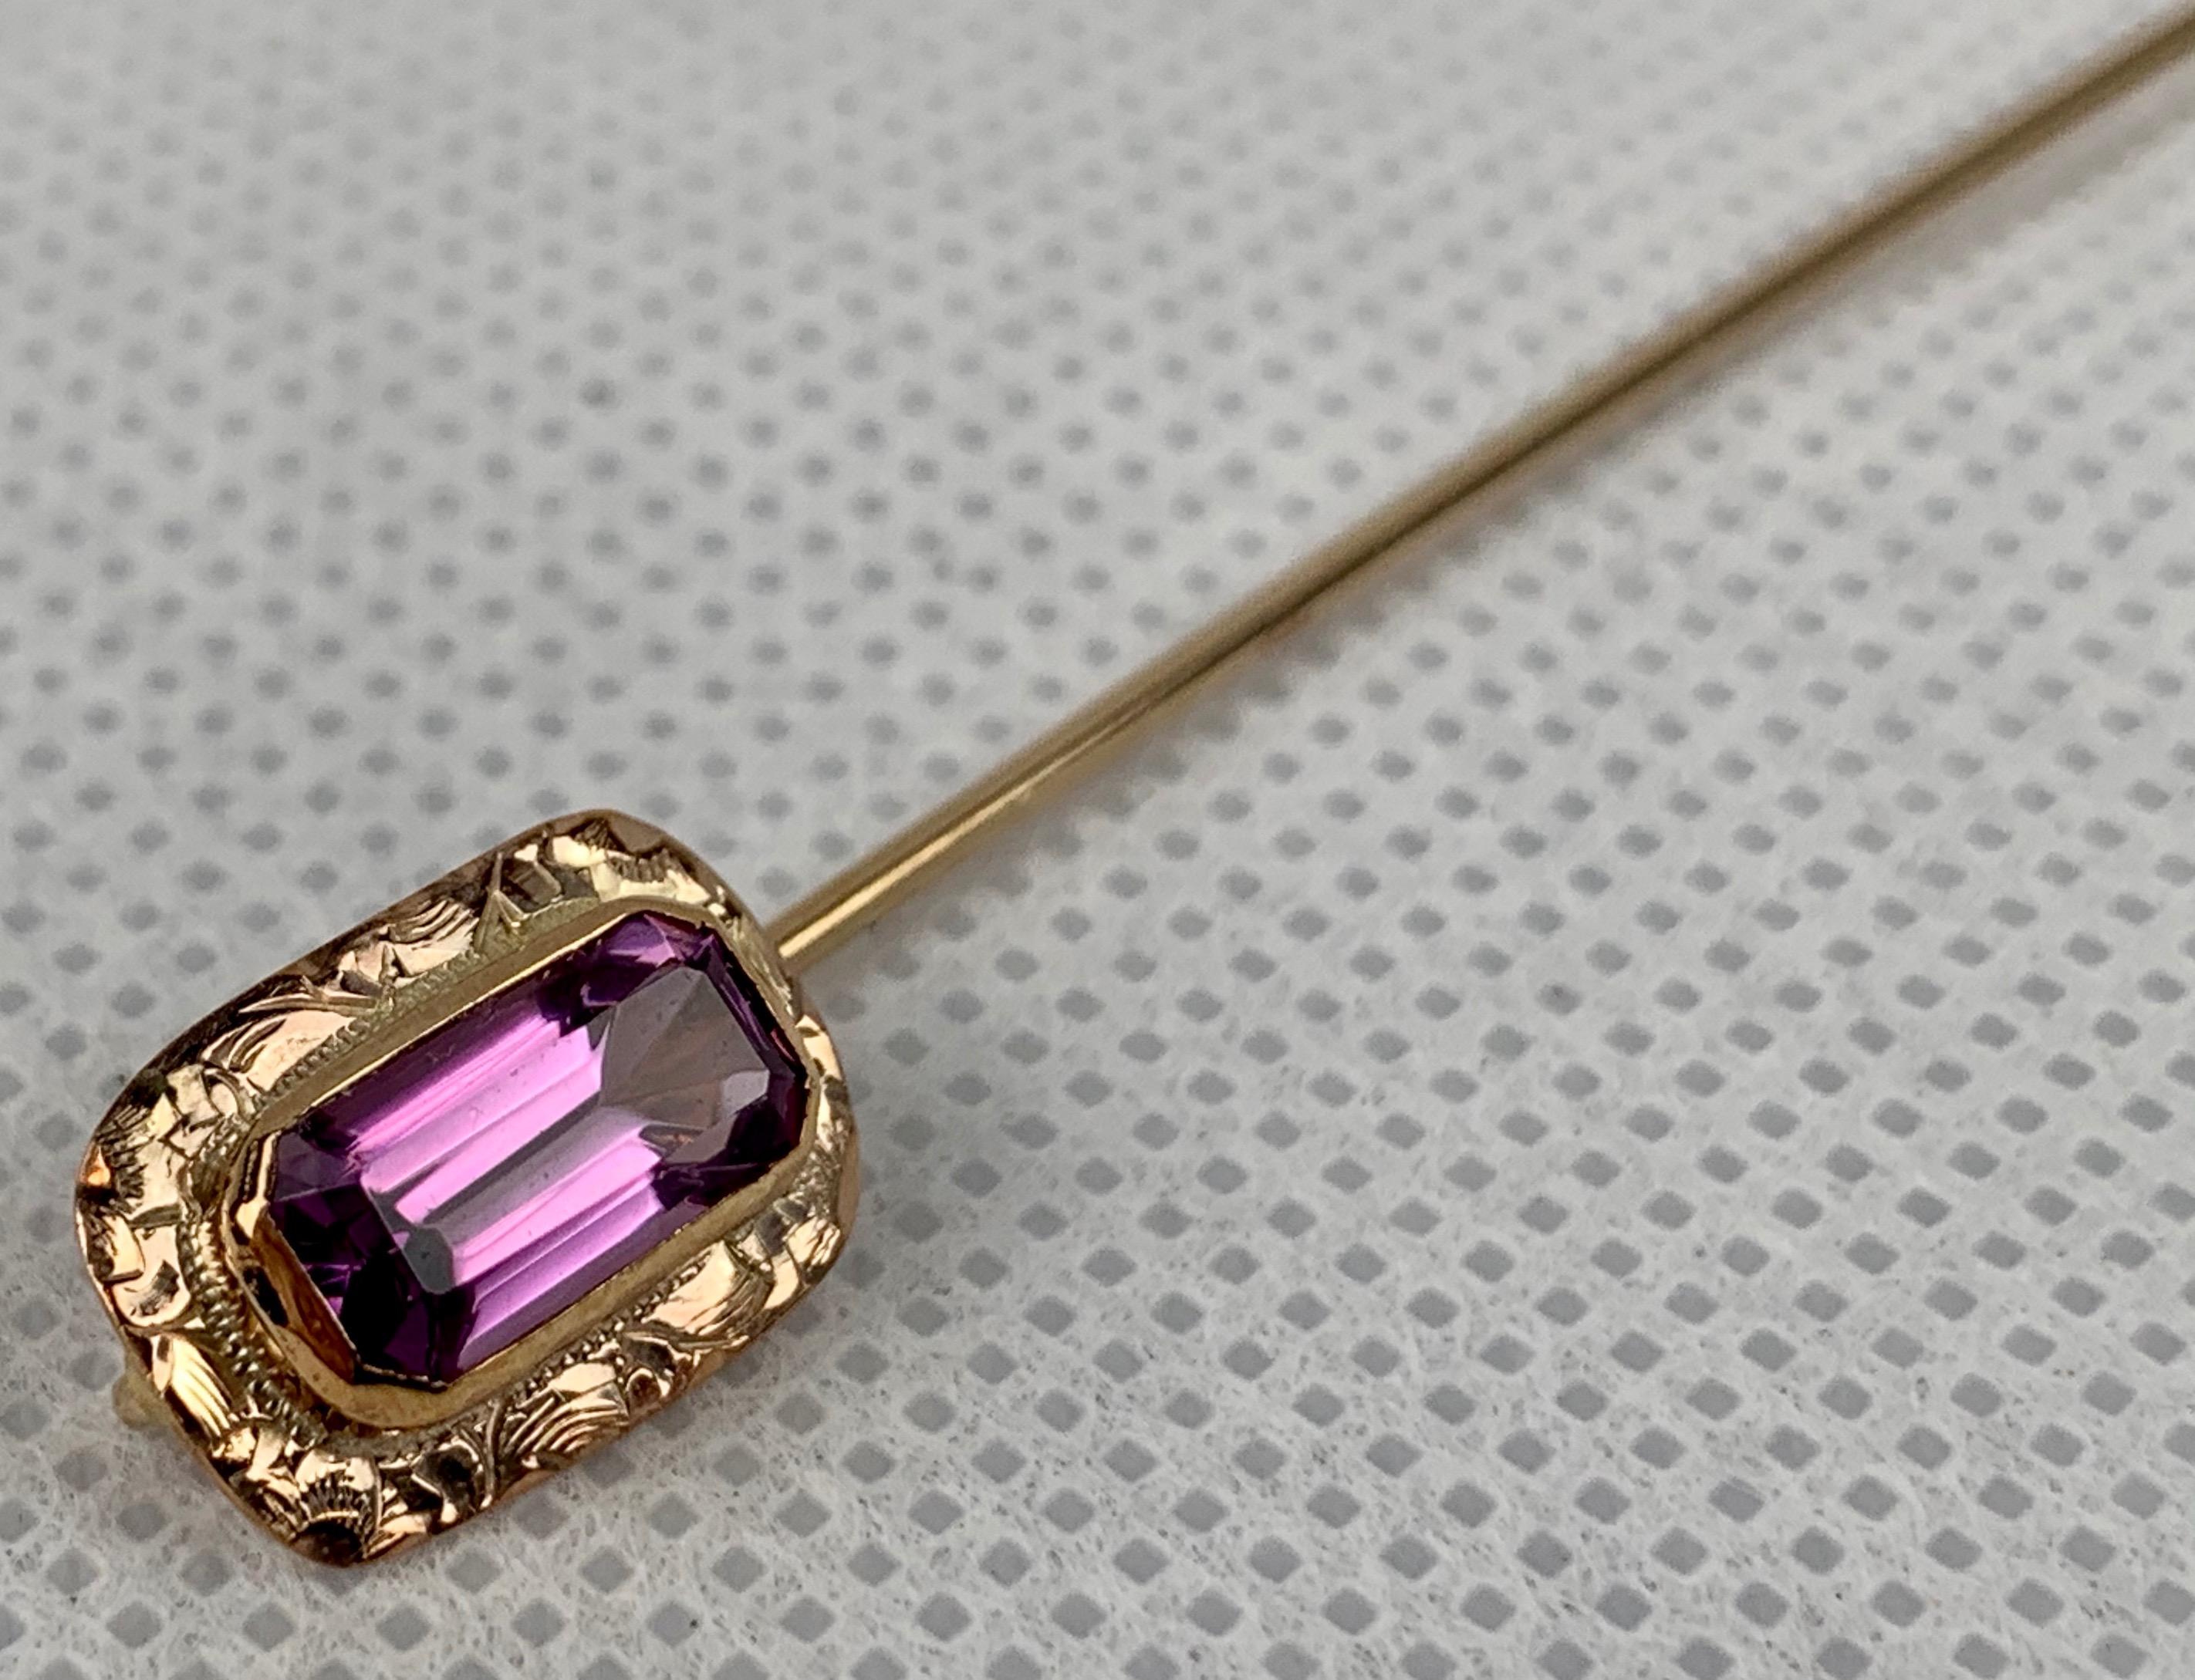 A Victorian 10k yellow gold gentleman's antique stickpin set with a faceted, rectangular cut amethyst stone.  The gold frame is beautifully hand engraved.
Professionally cleaned and polished.
1.8 grams
L-2.5